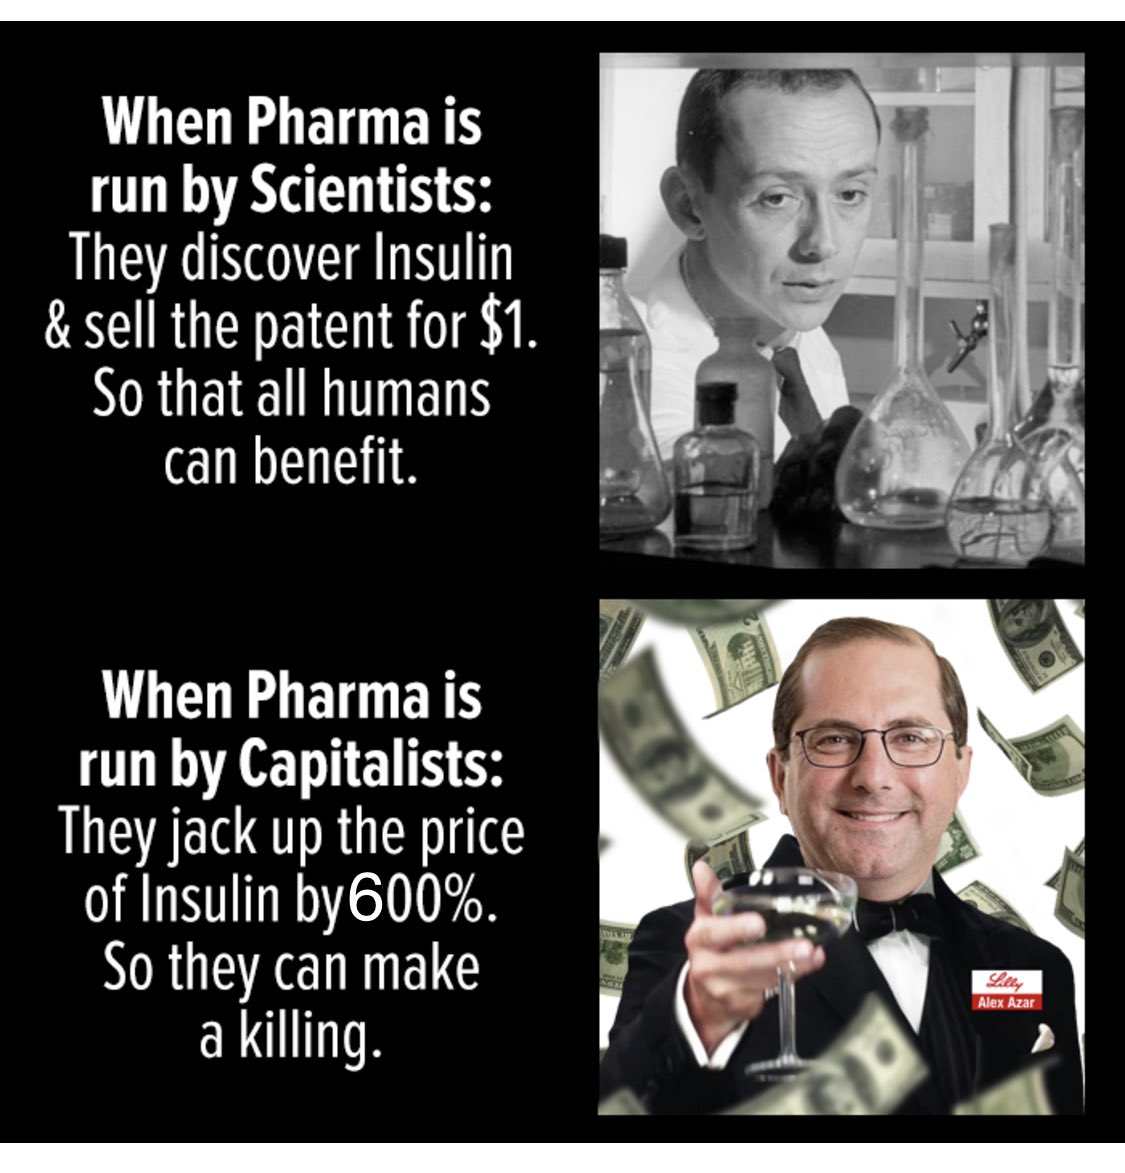 Big Pharma is ripping off America—because our politicians allow them to. *Campaign money in exchange for prescription drugs costing Americans 10X more, than they cost in any other country. Ozempic: Costs $5 to make Costs $90 in most countries Costs $1,000 in the United States